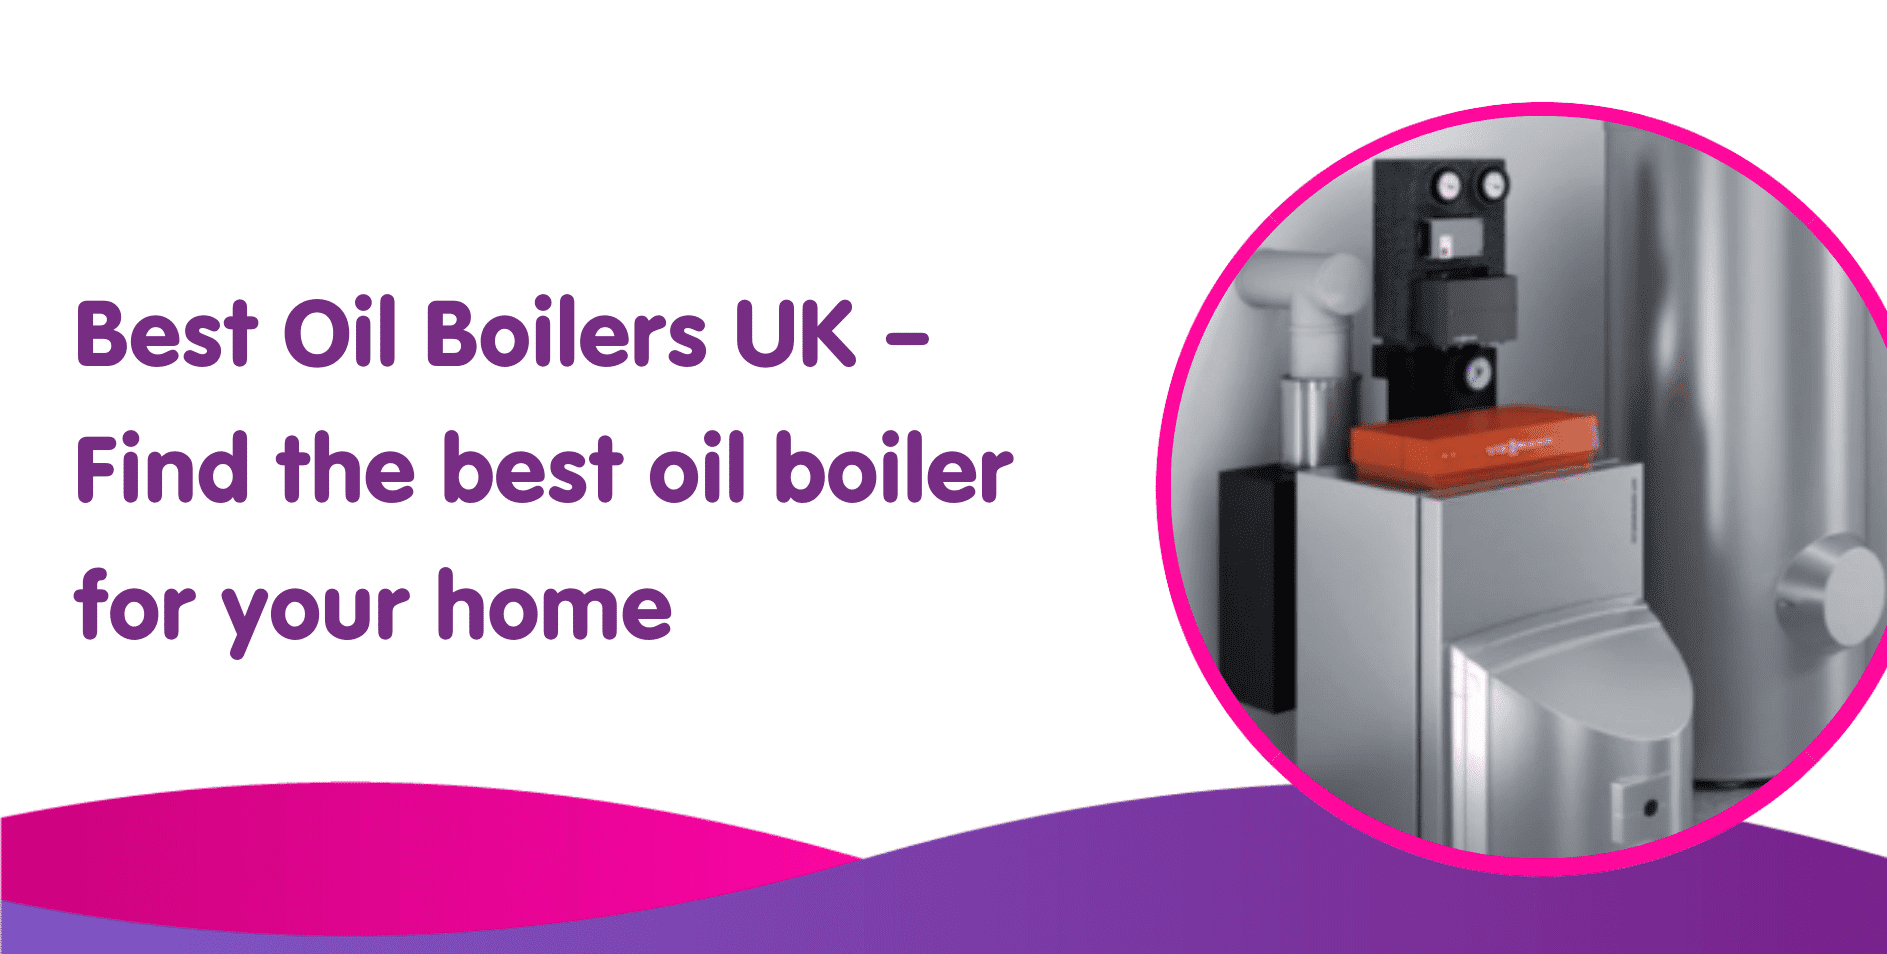 Best Oil Boilers UK – Find the best oil boiler for your home